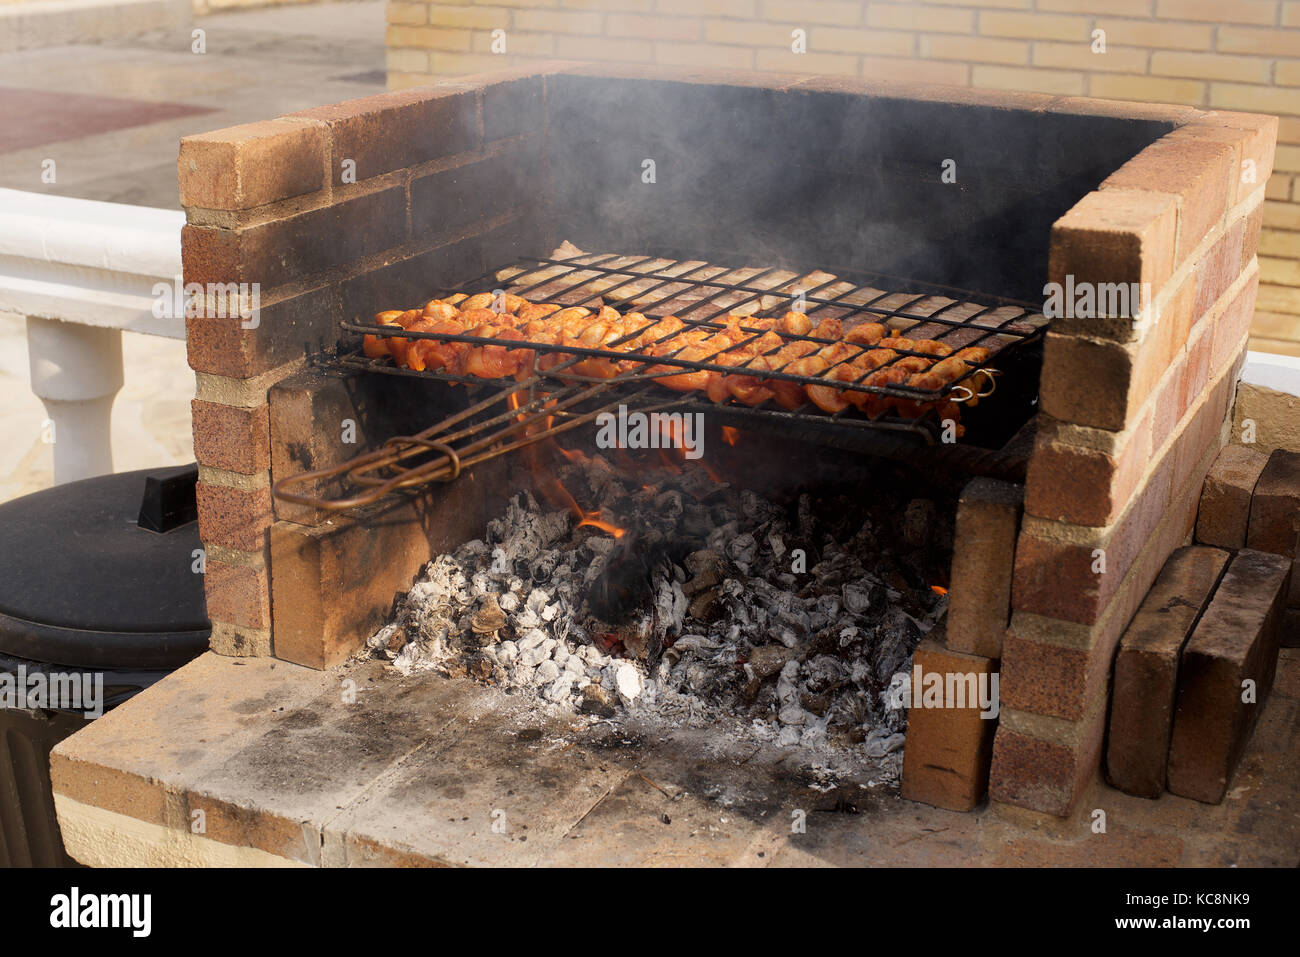 Cooking meat on a Bar-B-Que outdoors Stock Photo